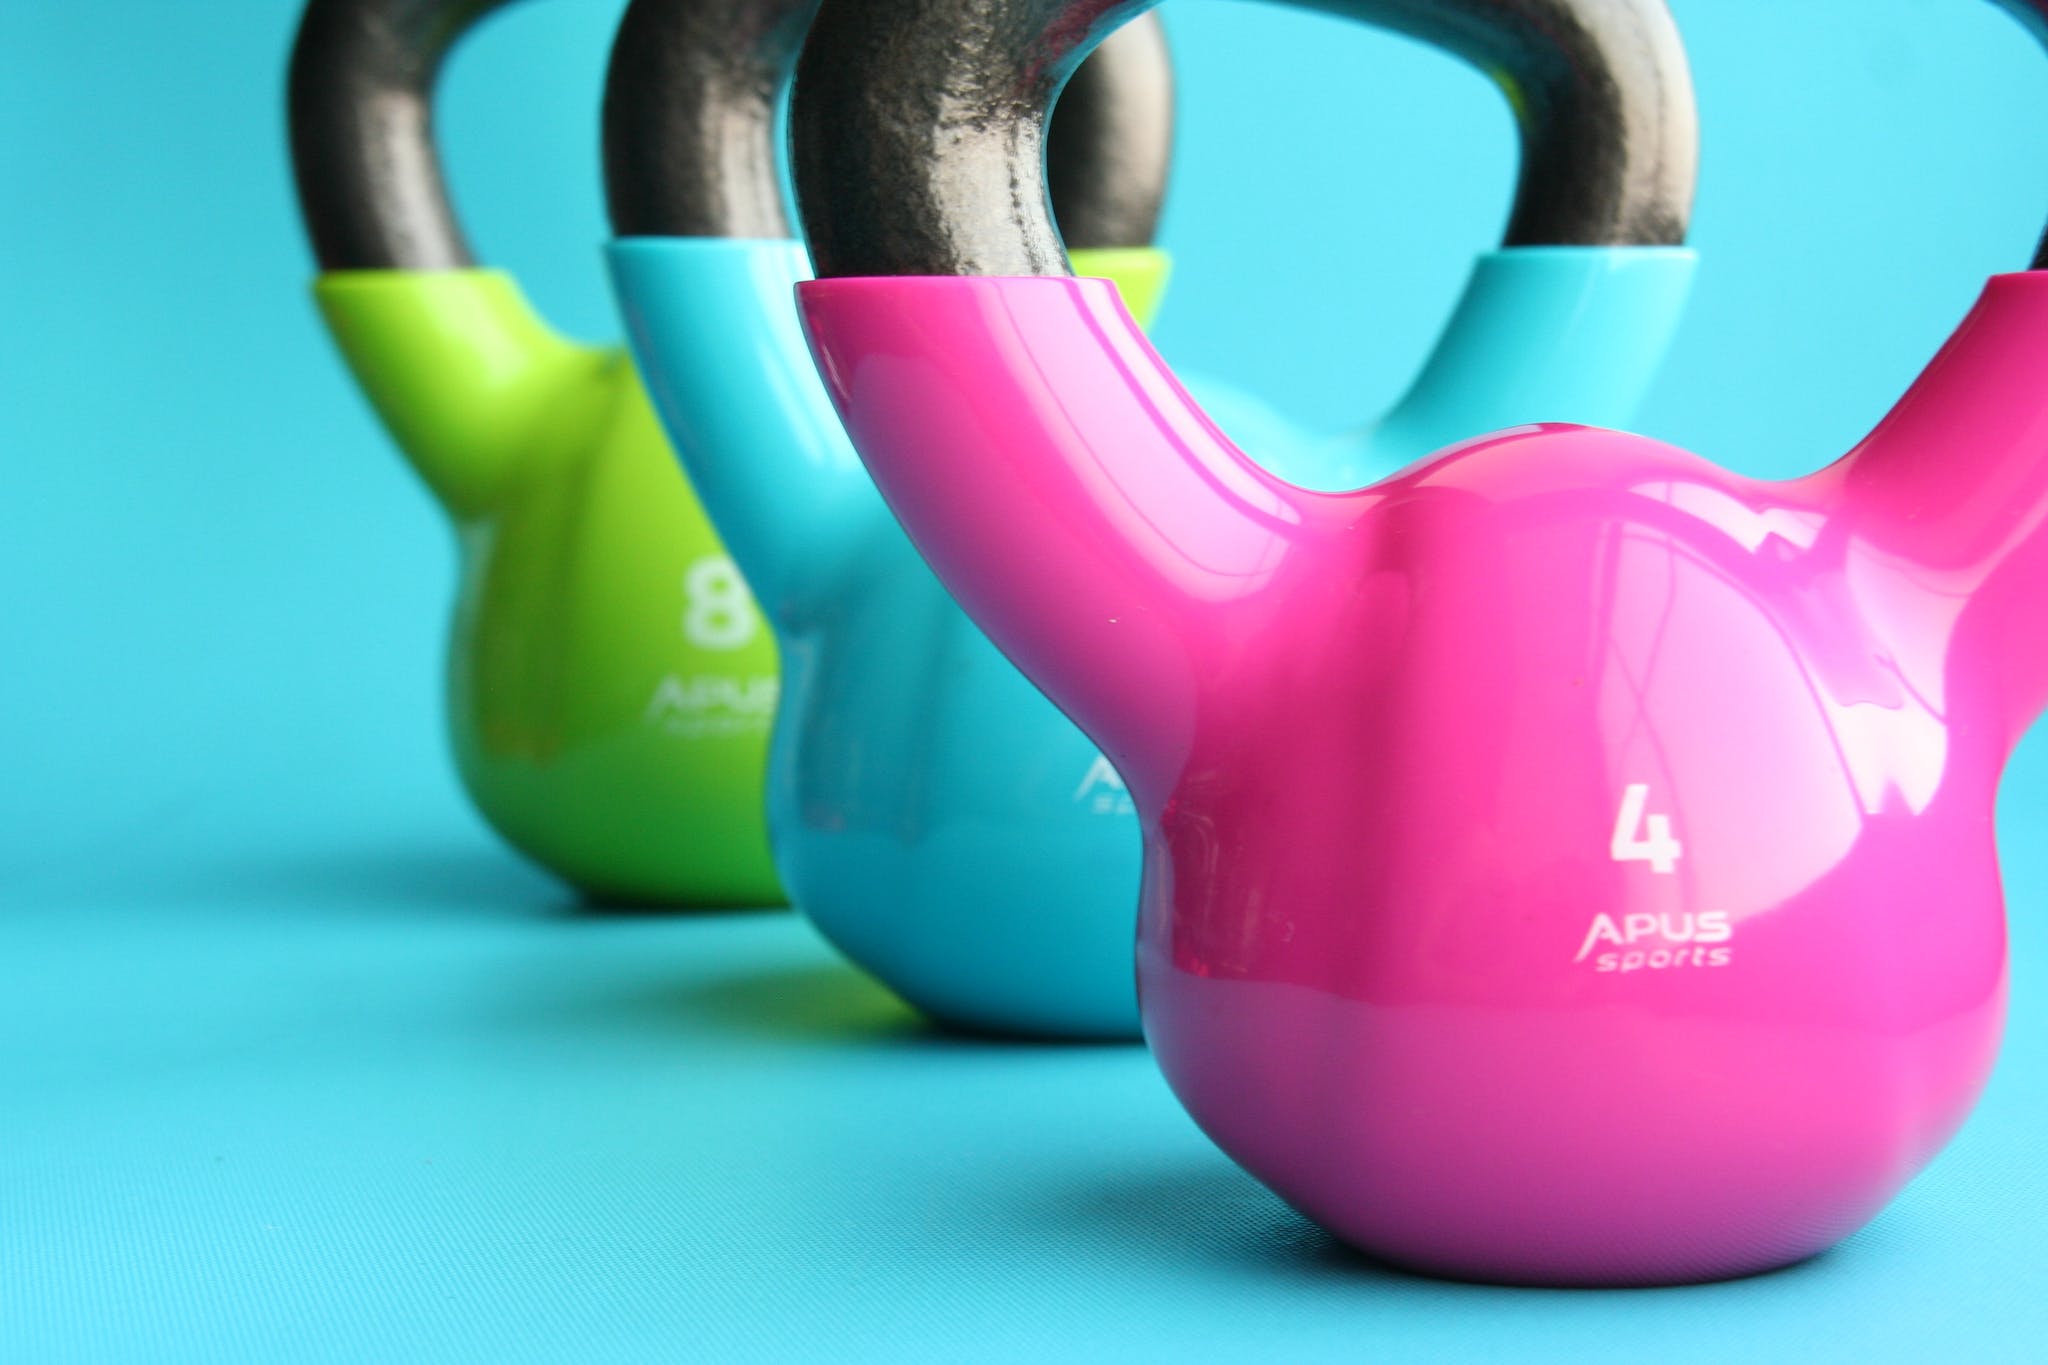 Green, Blue, and Pink Kettle Bells on Blue Surface